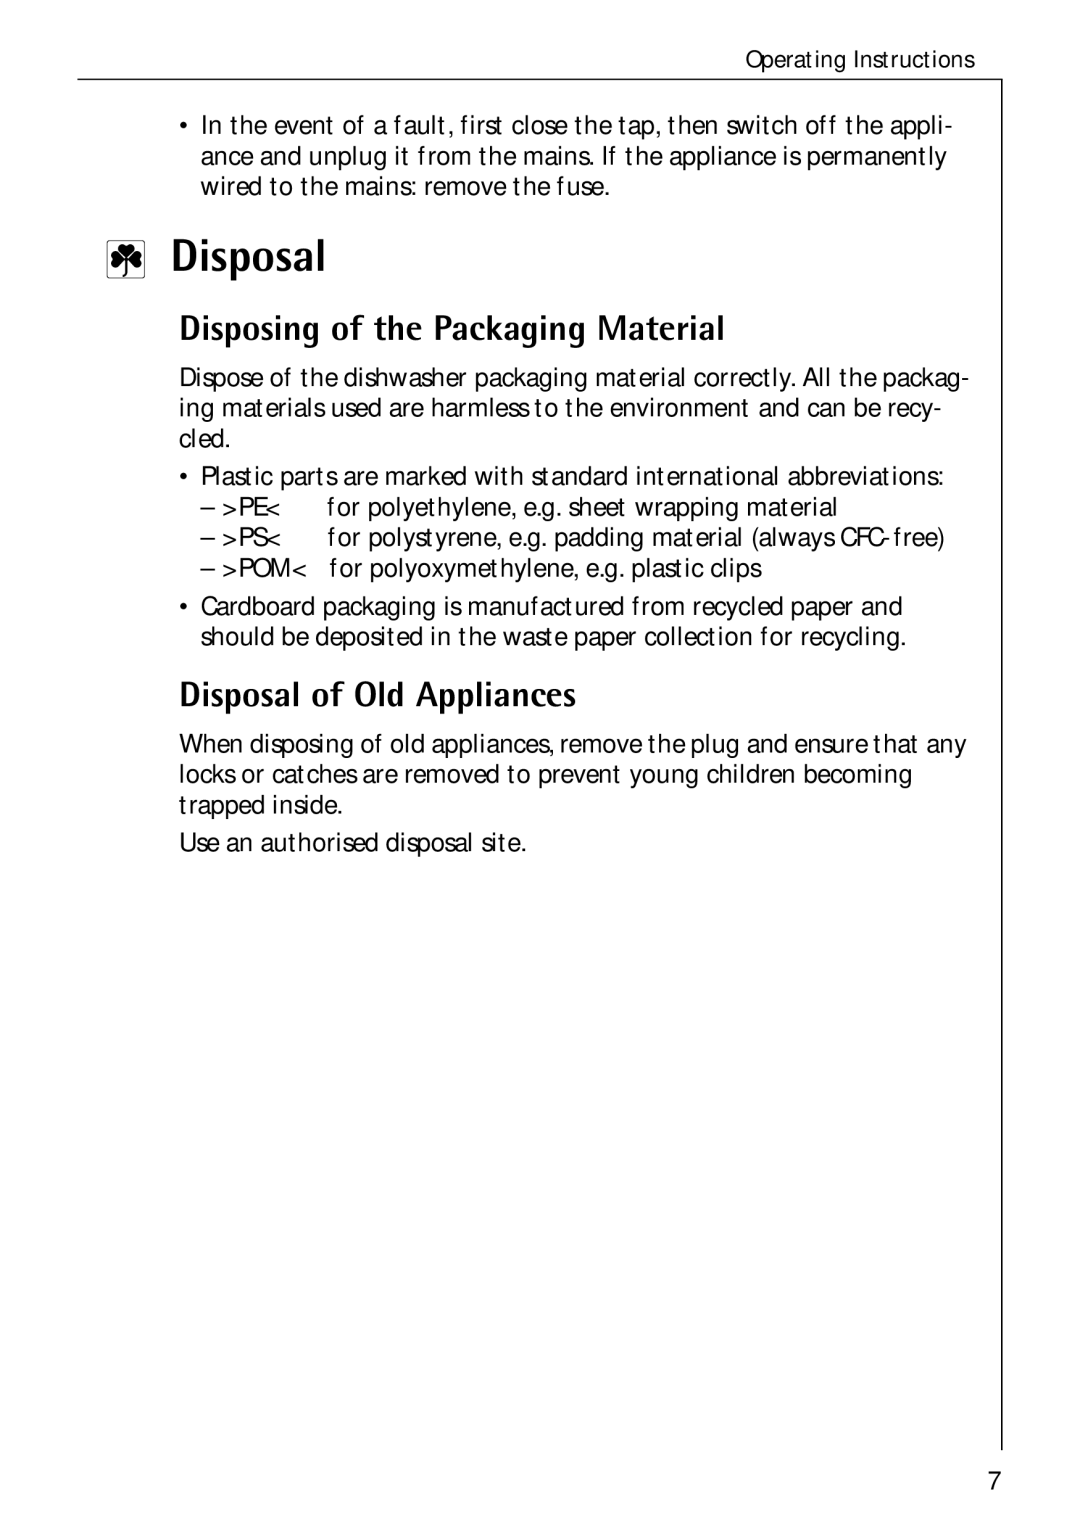 Electrolux 60750 VI manual Disposing of the Packaging Material, Disposal of Old Appliances 